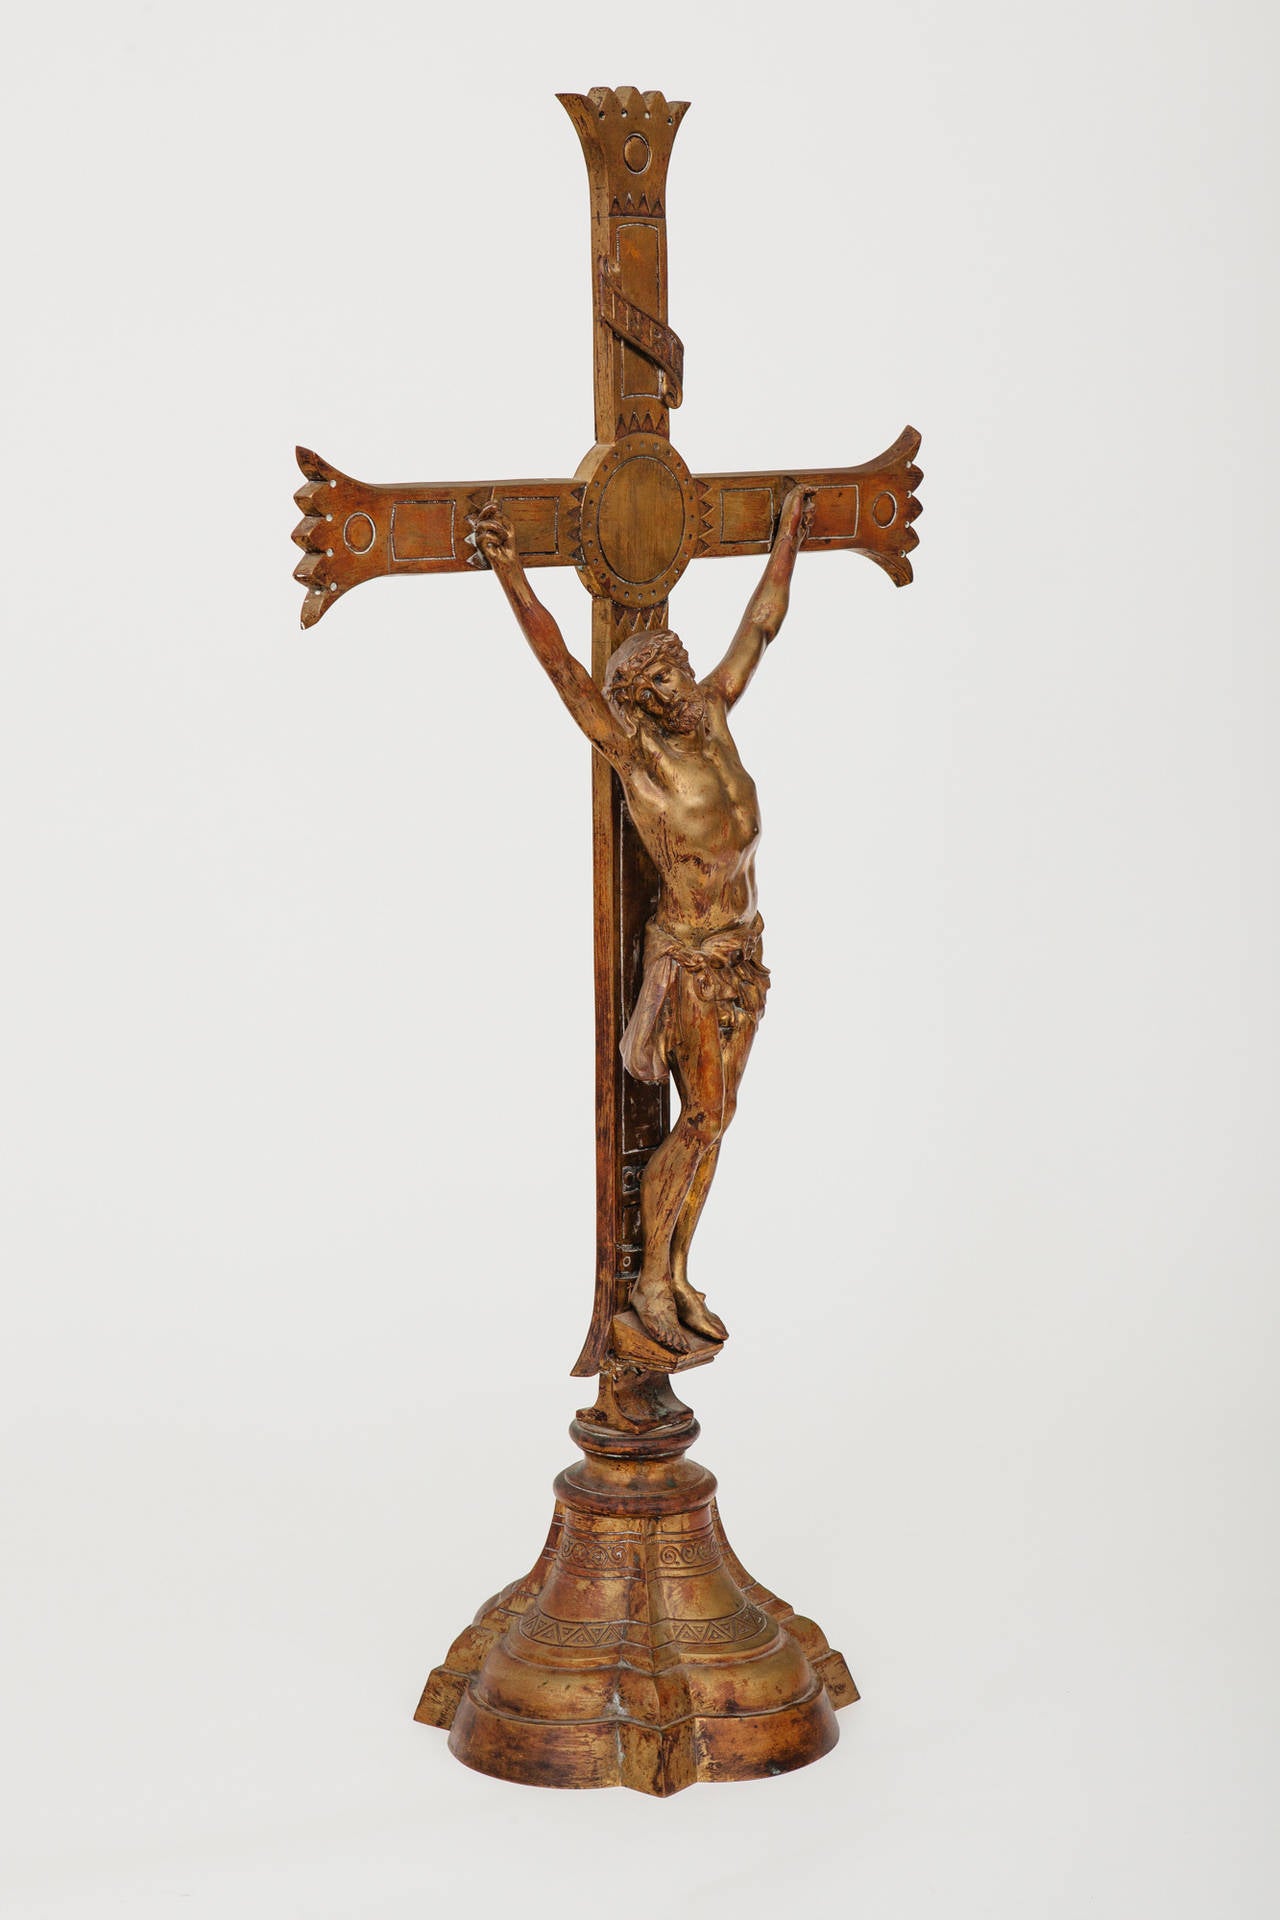 Huge cast bronze sculpture of a cross with Christ.
The after work and modeling is of high-quality for a figure of this size, as displayed by the chiseling of the hairs and the hammering of the cross.
Four suspension holes behind the body.